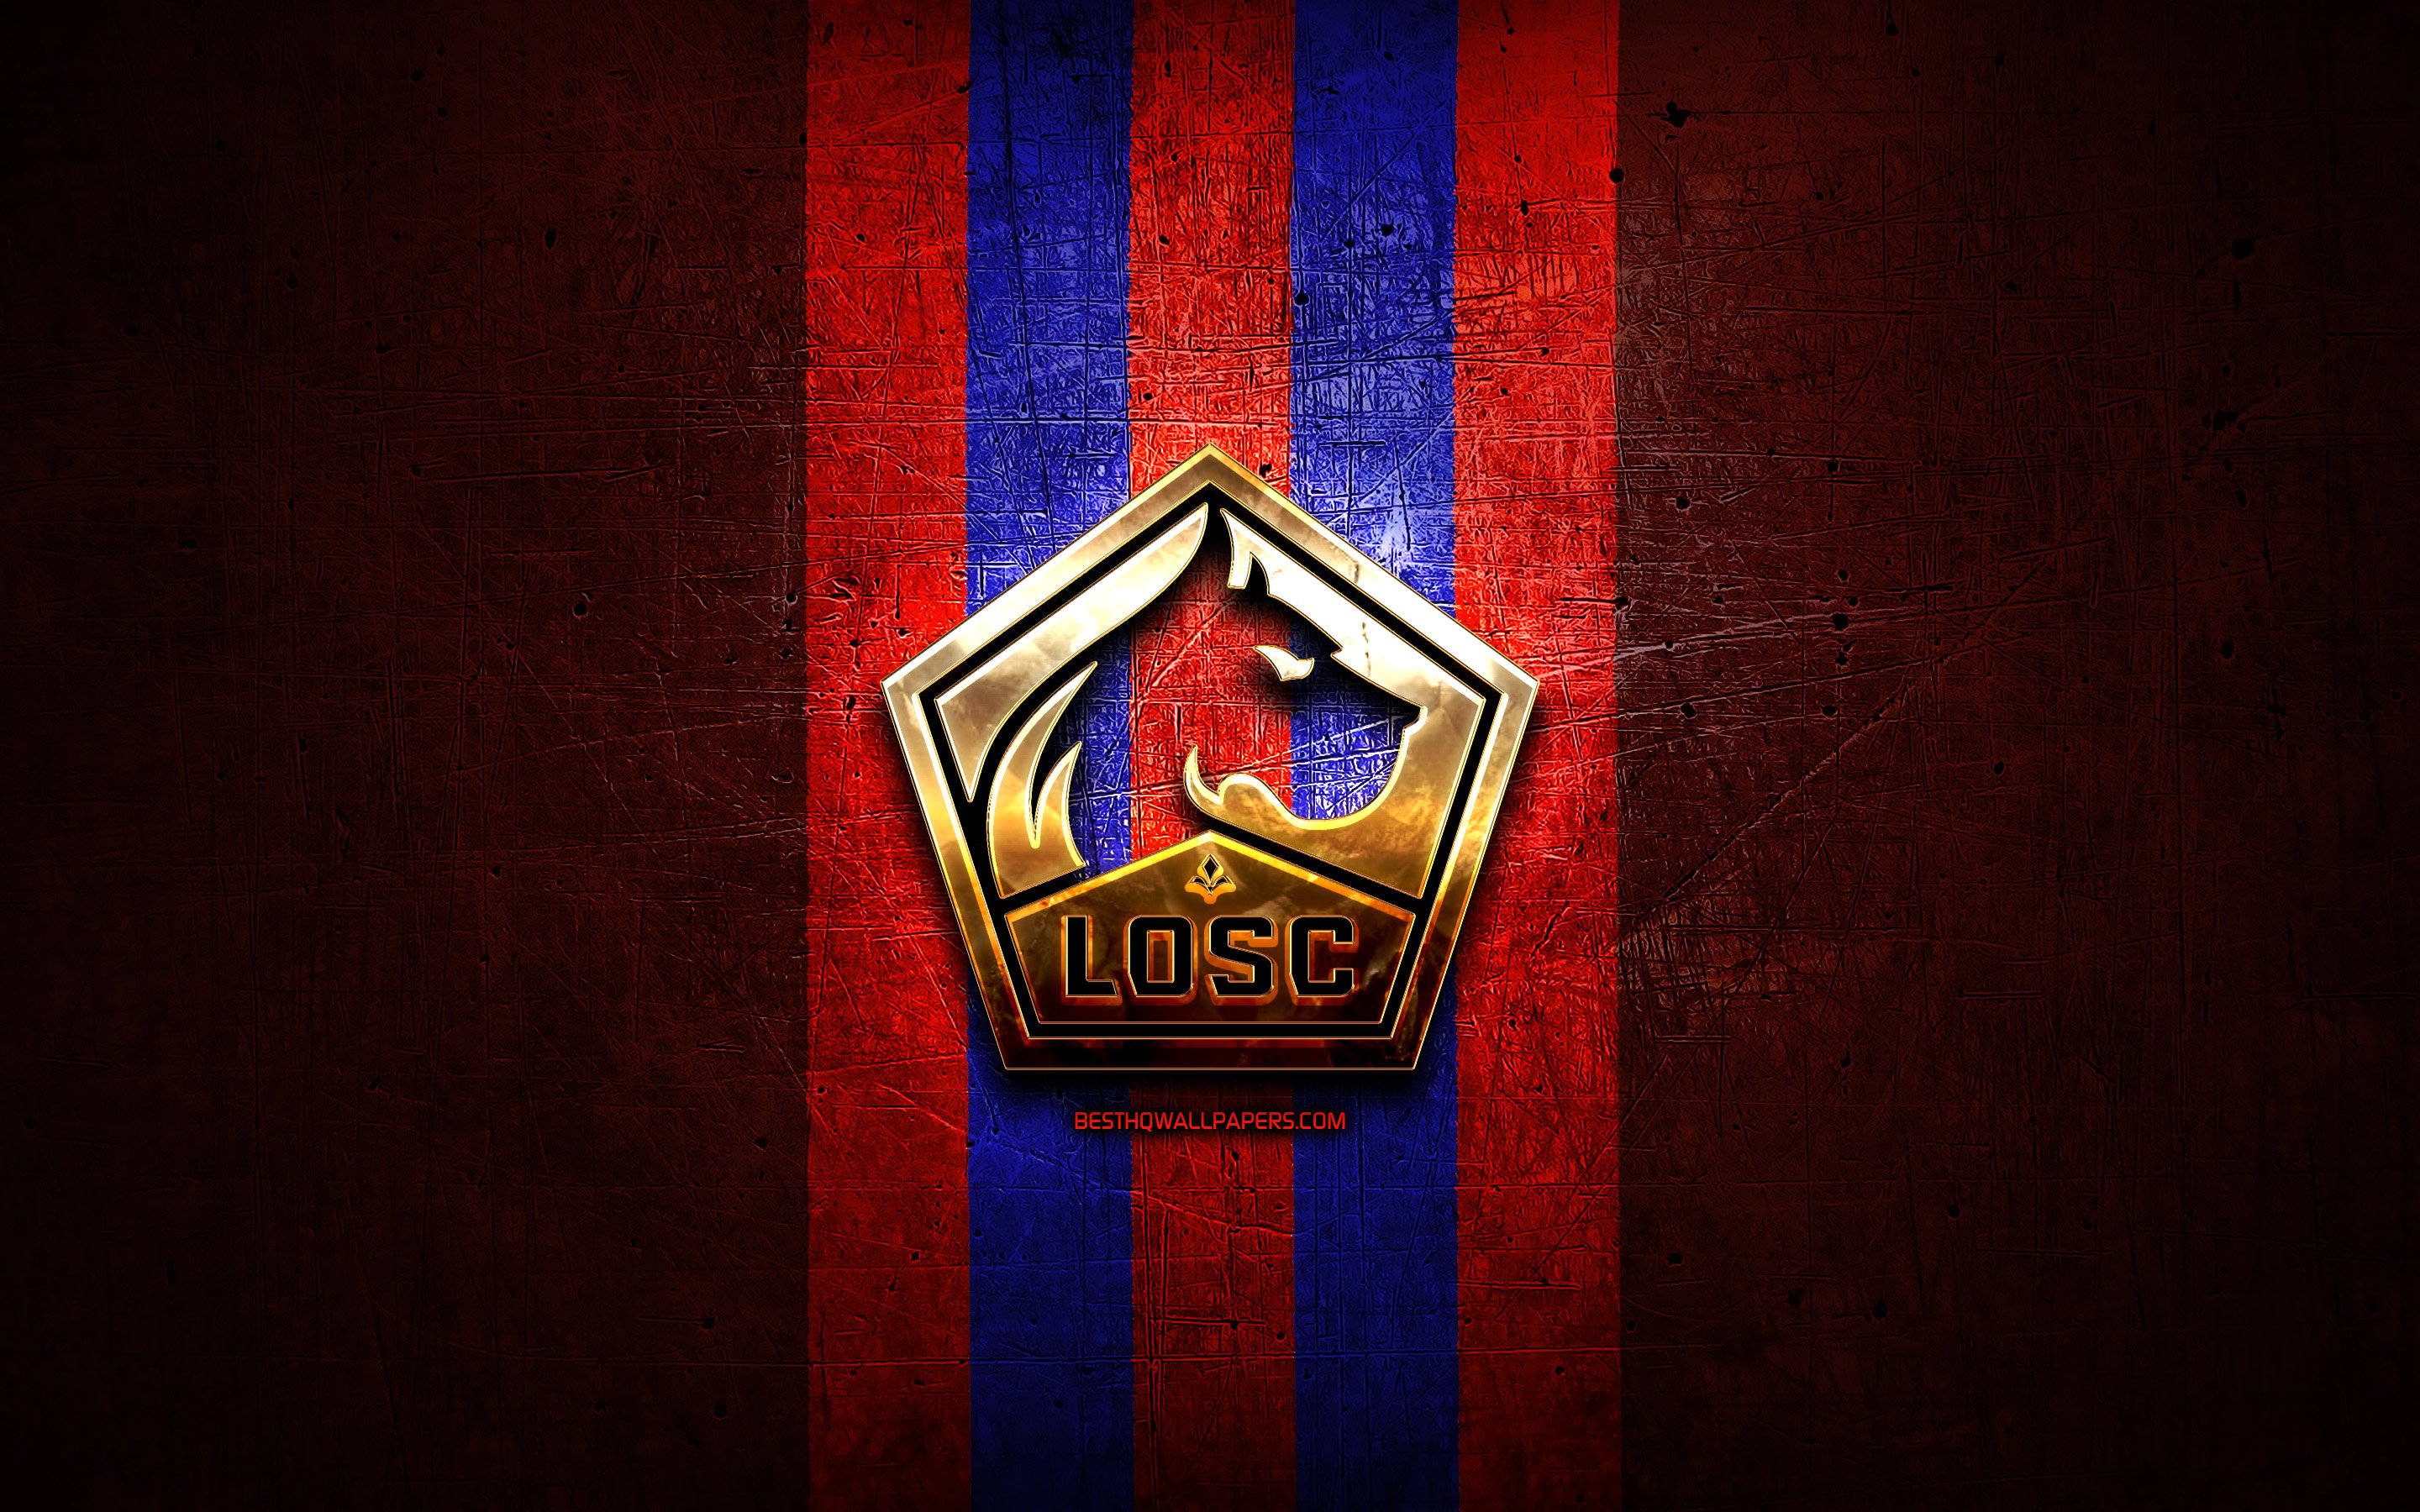 Download wallpaper LOSC Lille, golden logo, Ligue red metal background, football, french football club, LOSC Lille logo, soccer, France for desktop with resolution 2880x1800. High Quality HD picture wallpaper